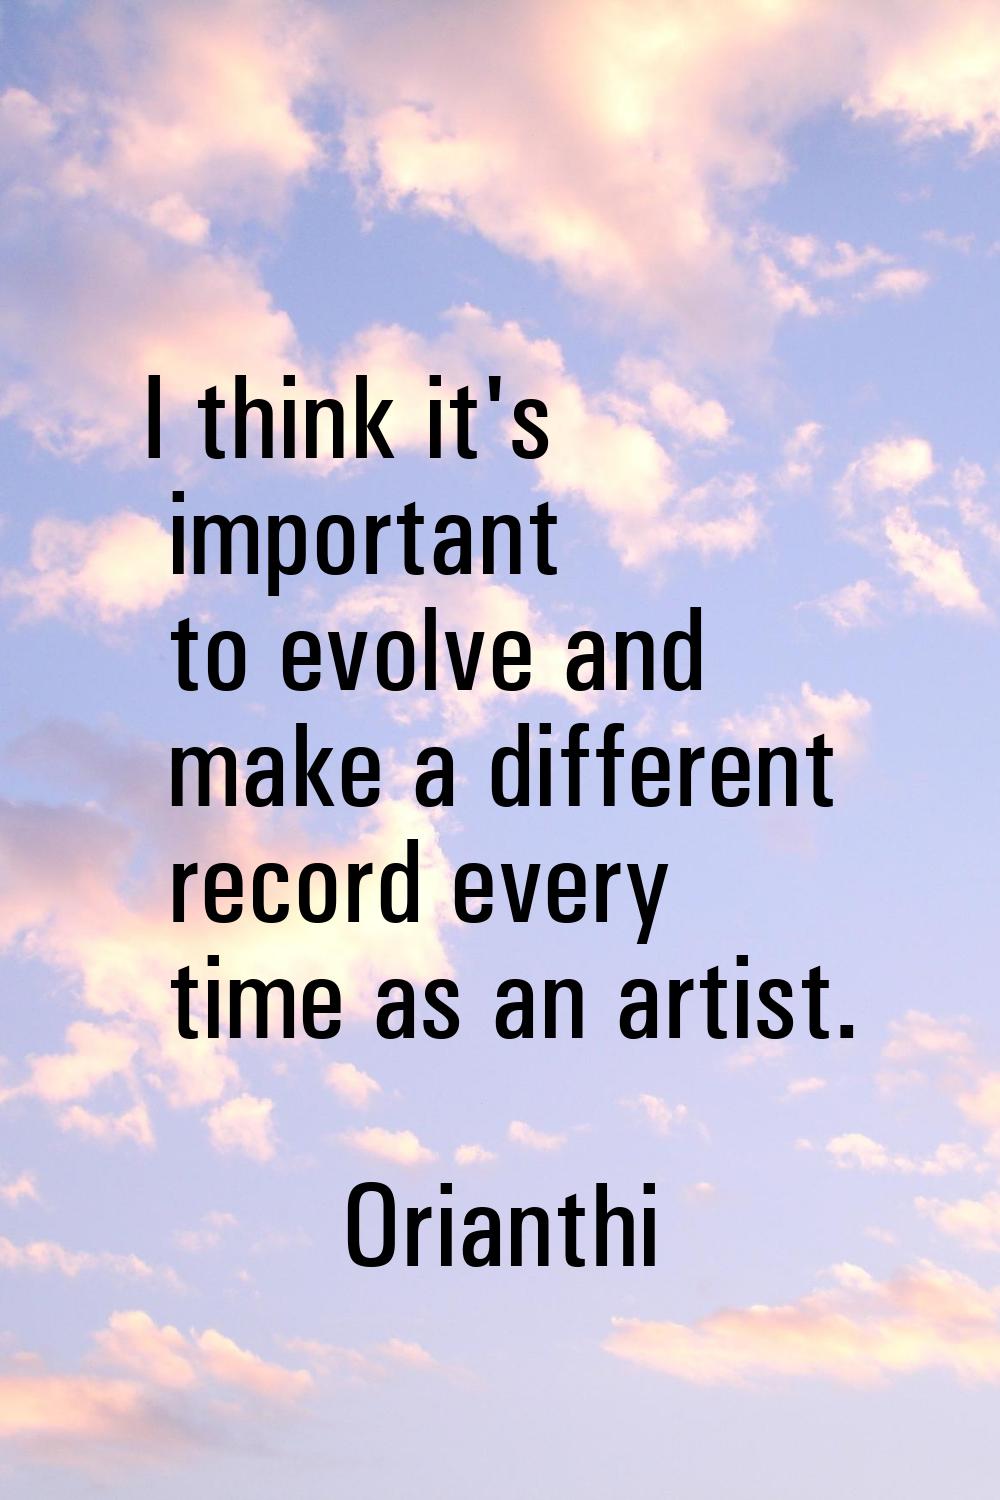 I think it's important to evolve and make a different record every time as an artist.